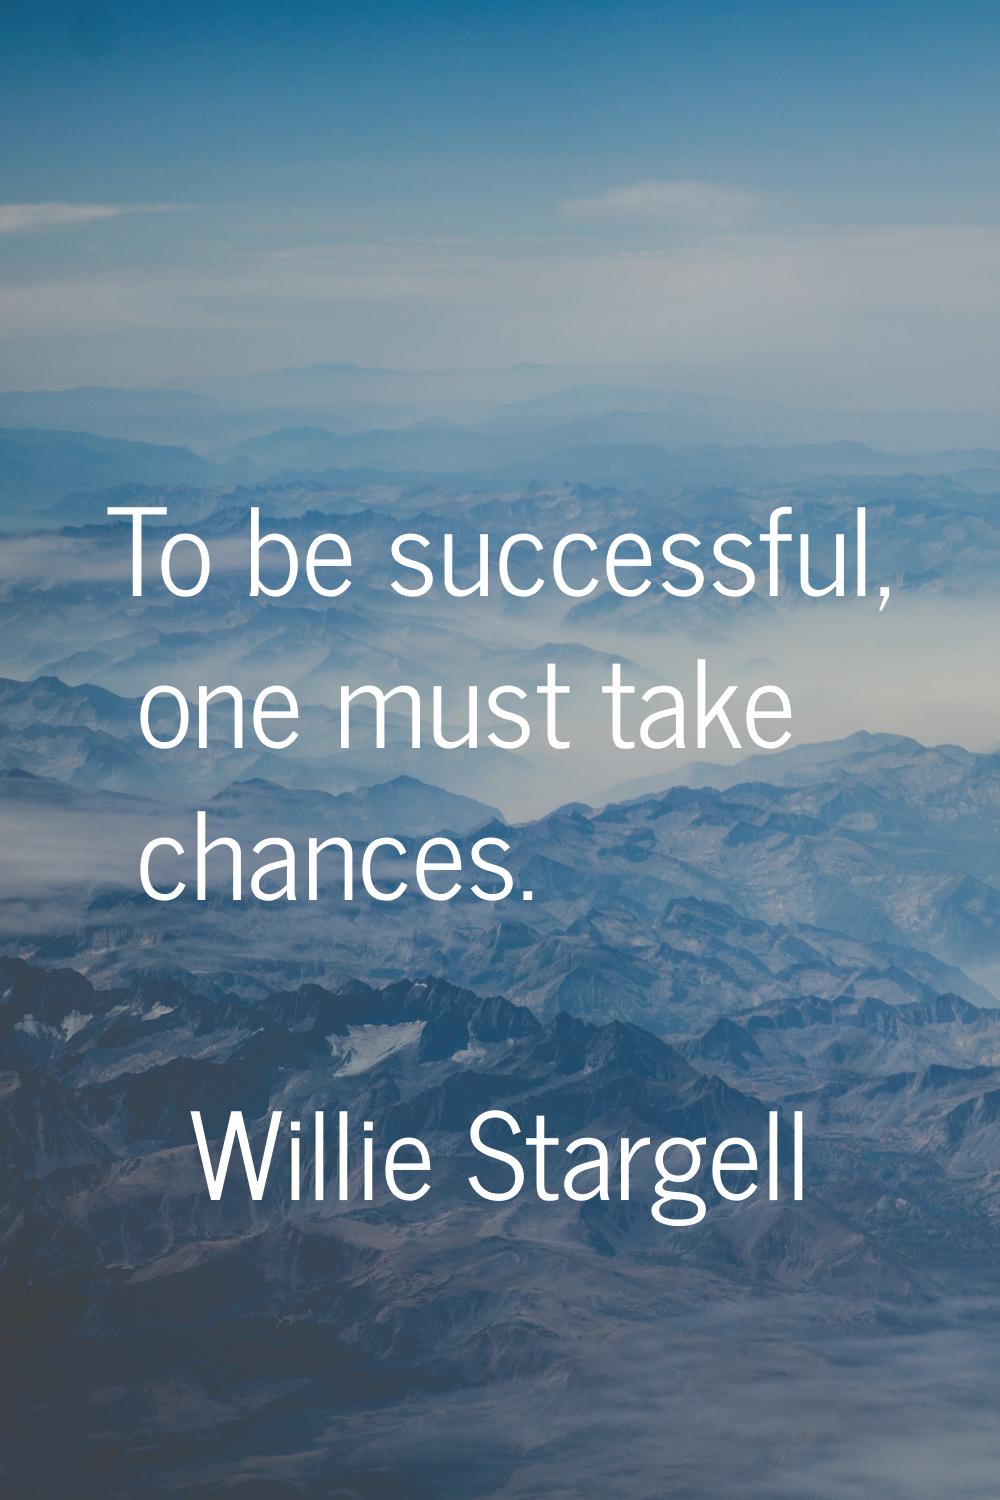 To be successful, one must take chances.